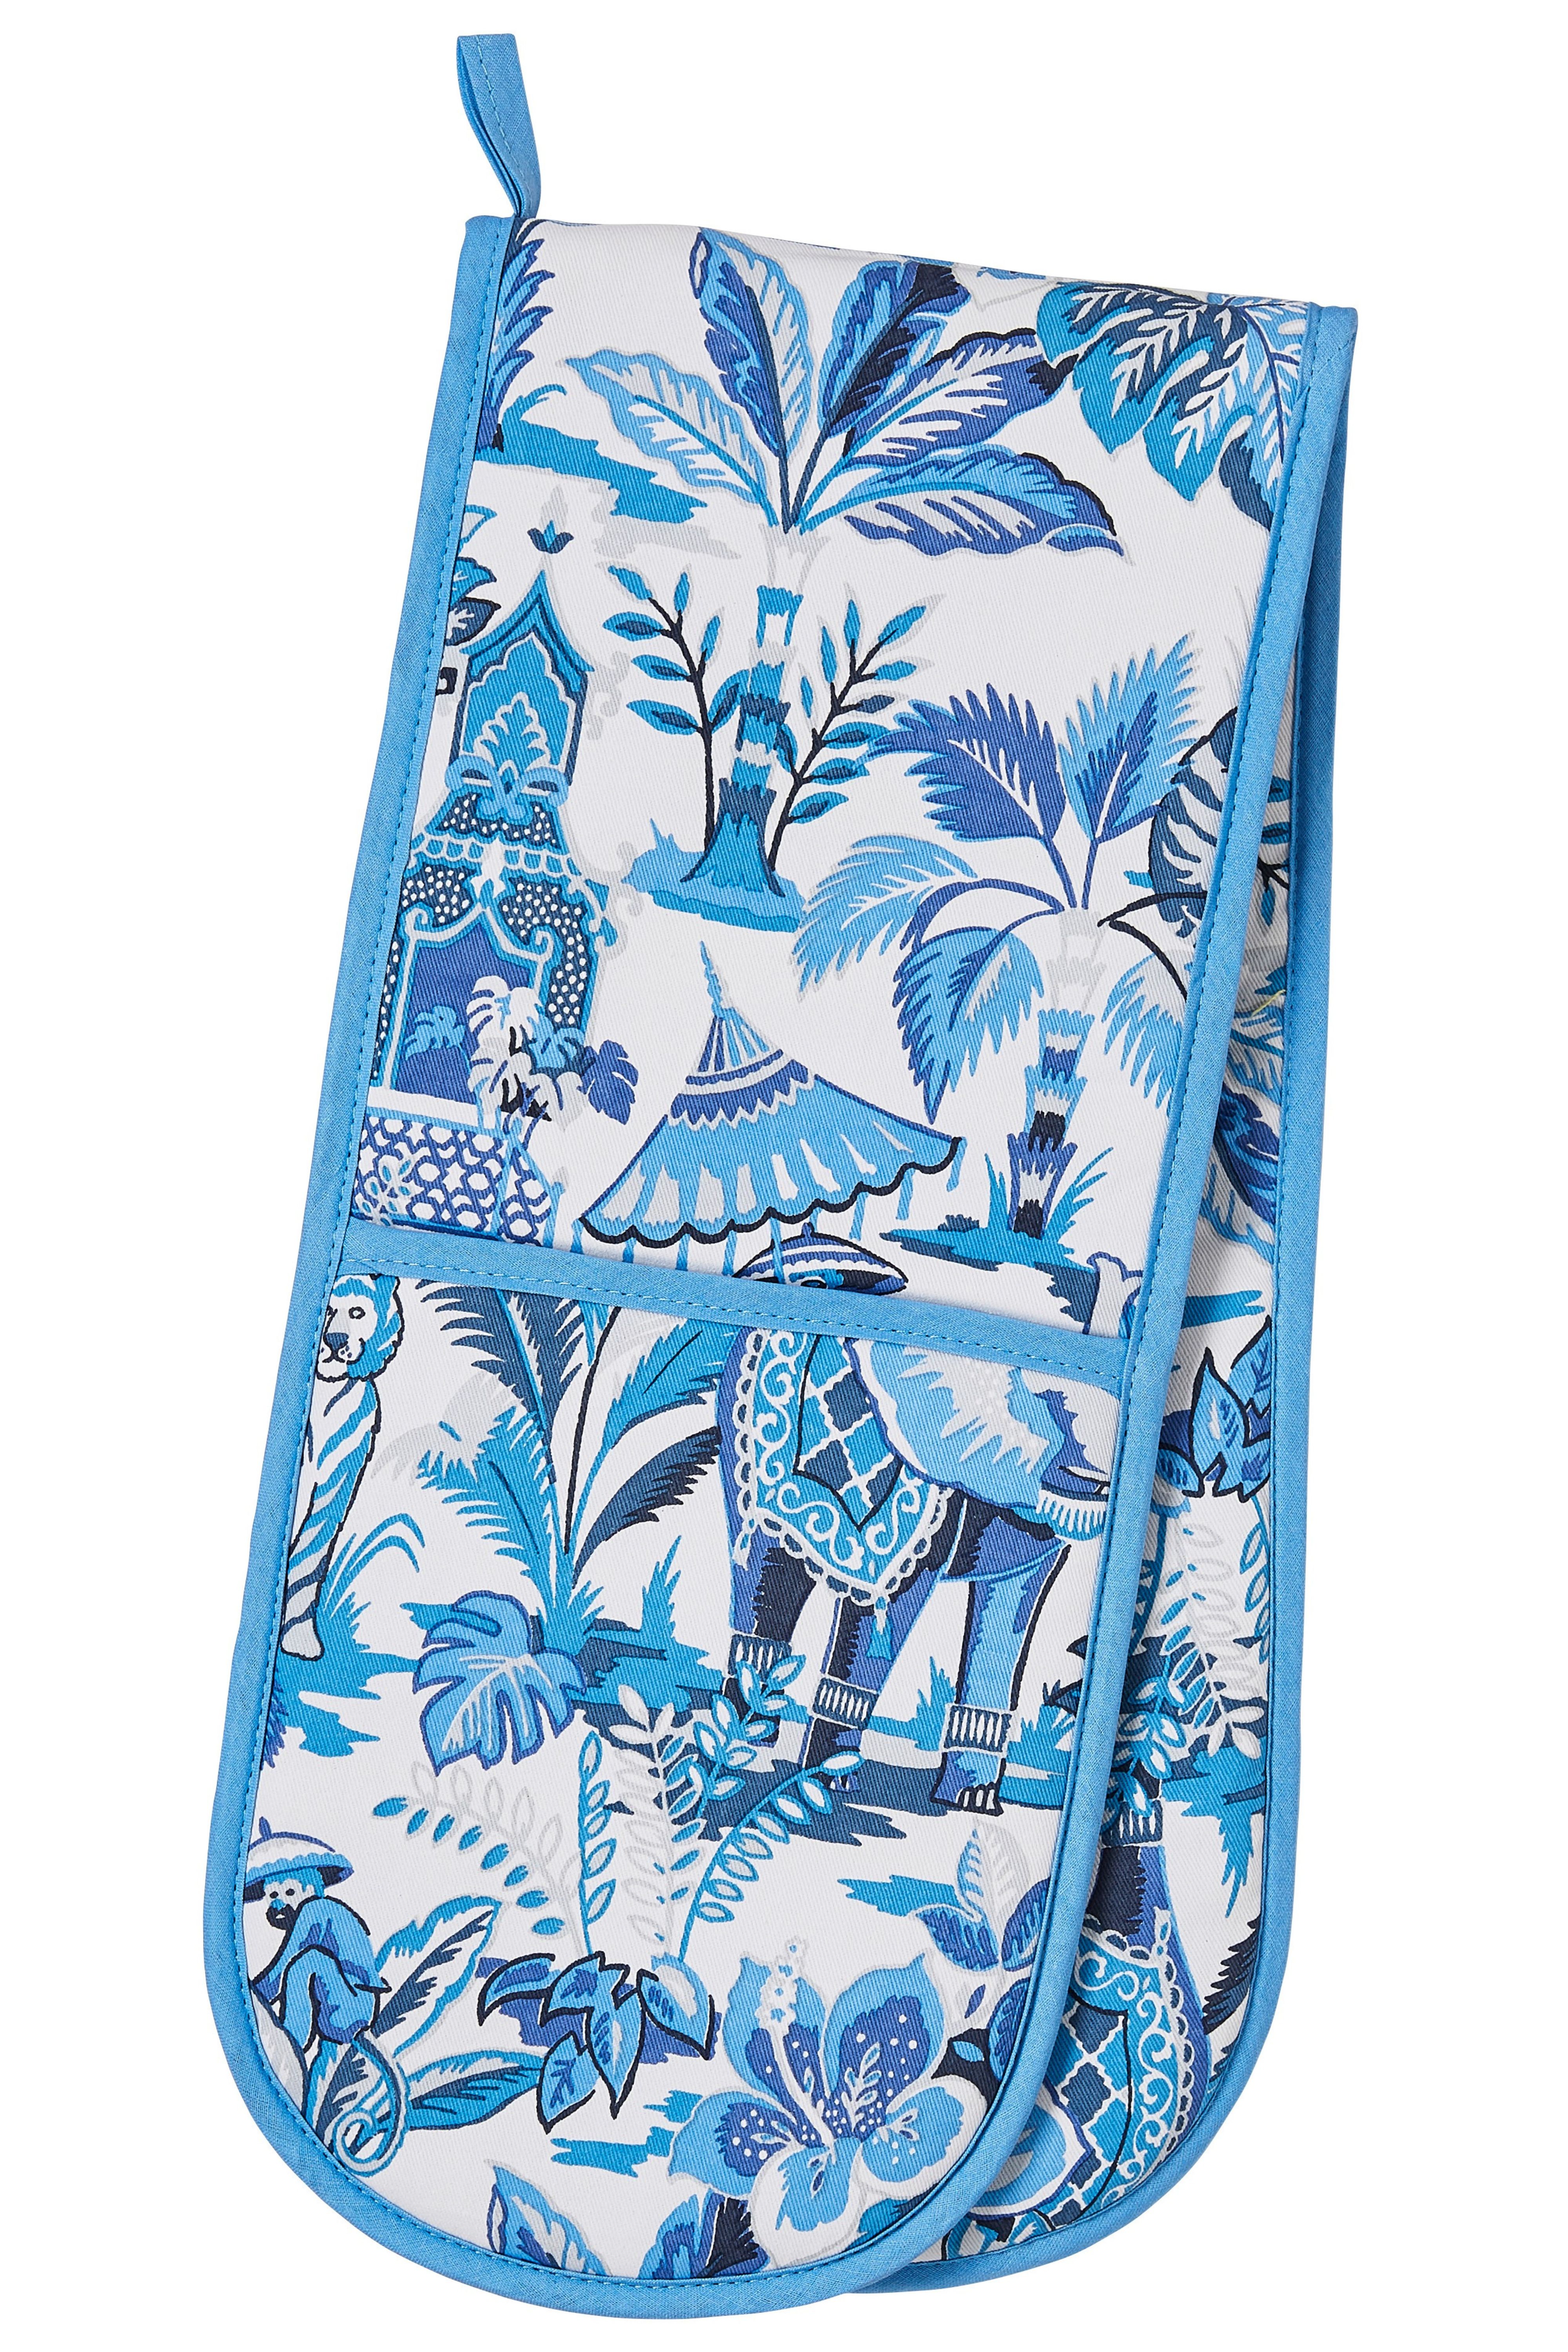 Ulster Weavers Double Oven Glove India Blue